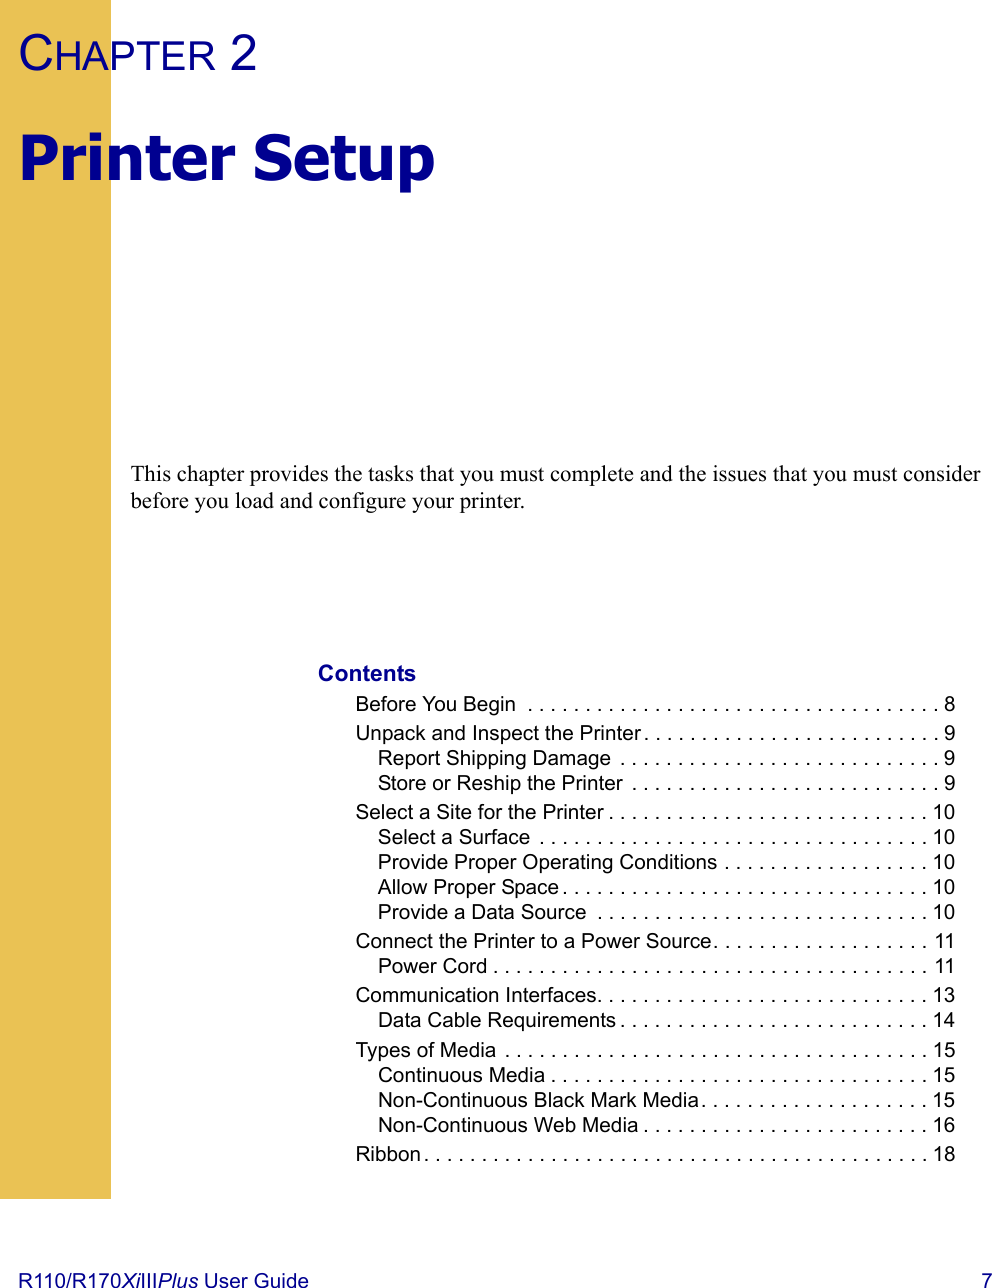 R110/R170XiIIIPlus User Guide  7CHAPTER 2Printer SetupThis chapter provides the tasks that you must complete and the issues that you must consider before you load and configure your printer.ContentsBefore You Begin  . . . . . . . . . . . . . . . . . . . . . . . . . . . . . . . . . . . . 8Unpack and Inspect the Printer. . . . . . . . . . . . . . . . . . . . . . . . . . 9Report Shipping Damage  . . . . . . . . . . . . . . . . . . . . . . . . . . . . 9Store or Reship the Printer  . . . . . . . . . . . . . . . . . . . . . . . . . . . 9Select a Site for the Printer . . . . . . . . . . . . . . . . . . . . . . . . . . . . 10Select a Surface  . . . . . . . . . . . . . . . . . . . . . . . . . . . . . . . . . . 10Provide Proper Operating Conditions . . . . . . . . . . . . . . . . . . 10Allow Proper Space . . . . . . . . . . . . . . . . . . . . . . . . . . . . . . . . 10Provide a Data Source  . . . . . . . . . . . . . . . . . . . . . . . . . . . . . 10Connect the Printer to a Power Source. . . . . . . . . . . . . . . . . . . 11Power Cord . . . . . . . . . . . . . . . . . . . . . . . . . . . . . . . . . . . . . . 11Communication Interfaces. . . . . . . . . . . . . . . . . . . . . . . . . . . . . 13Data Cable Requirements . . . . . . . . . . . . . . . . . . . . . . . . . . . 14Types of Media . . . . . . . . . . . . . . . . . . . . . . . . . . . . . . . . . . . . . 15Continuous Media . . . . . . . . . . . . . . . . . . . . . . . . . . . . . . . . . 15Non-Continuous Black Mark Media. . . . . . . . . . . . . . . . . . . . 15Non-Continuous Web Media . . . . . . . . . . . . . . . . . . . . . . . . . 16Ribbon. . . . . . . . . . . . . . . . . . . . . . . . . . . . . . . . . . . . . . . . . . . . 18 